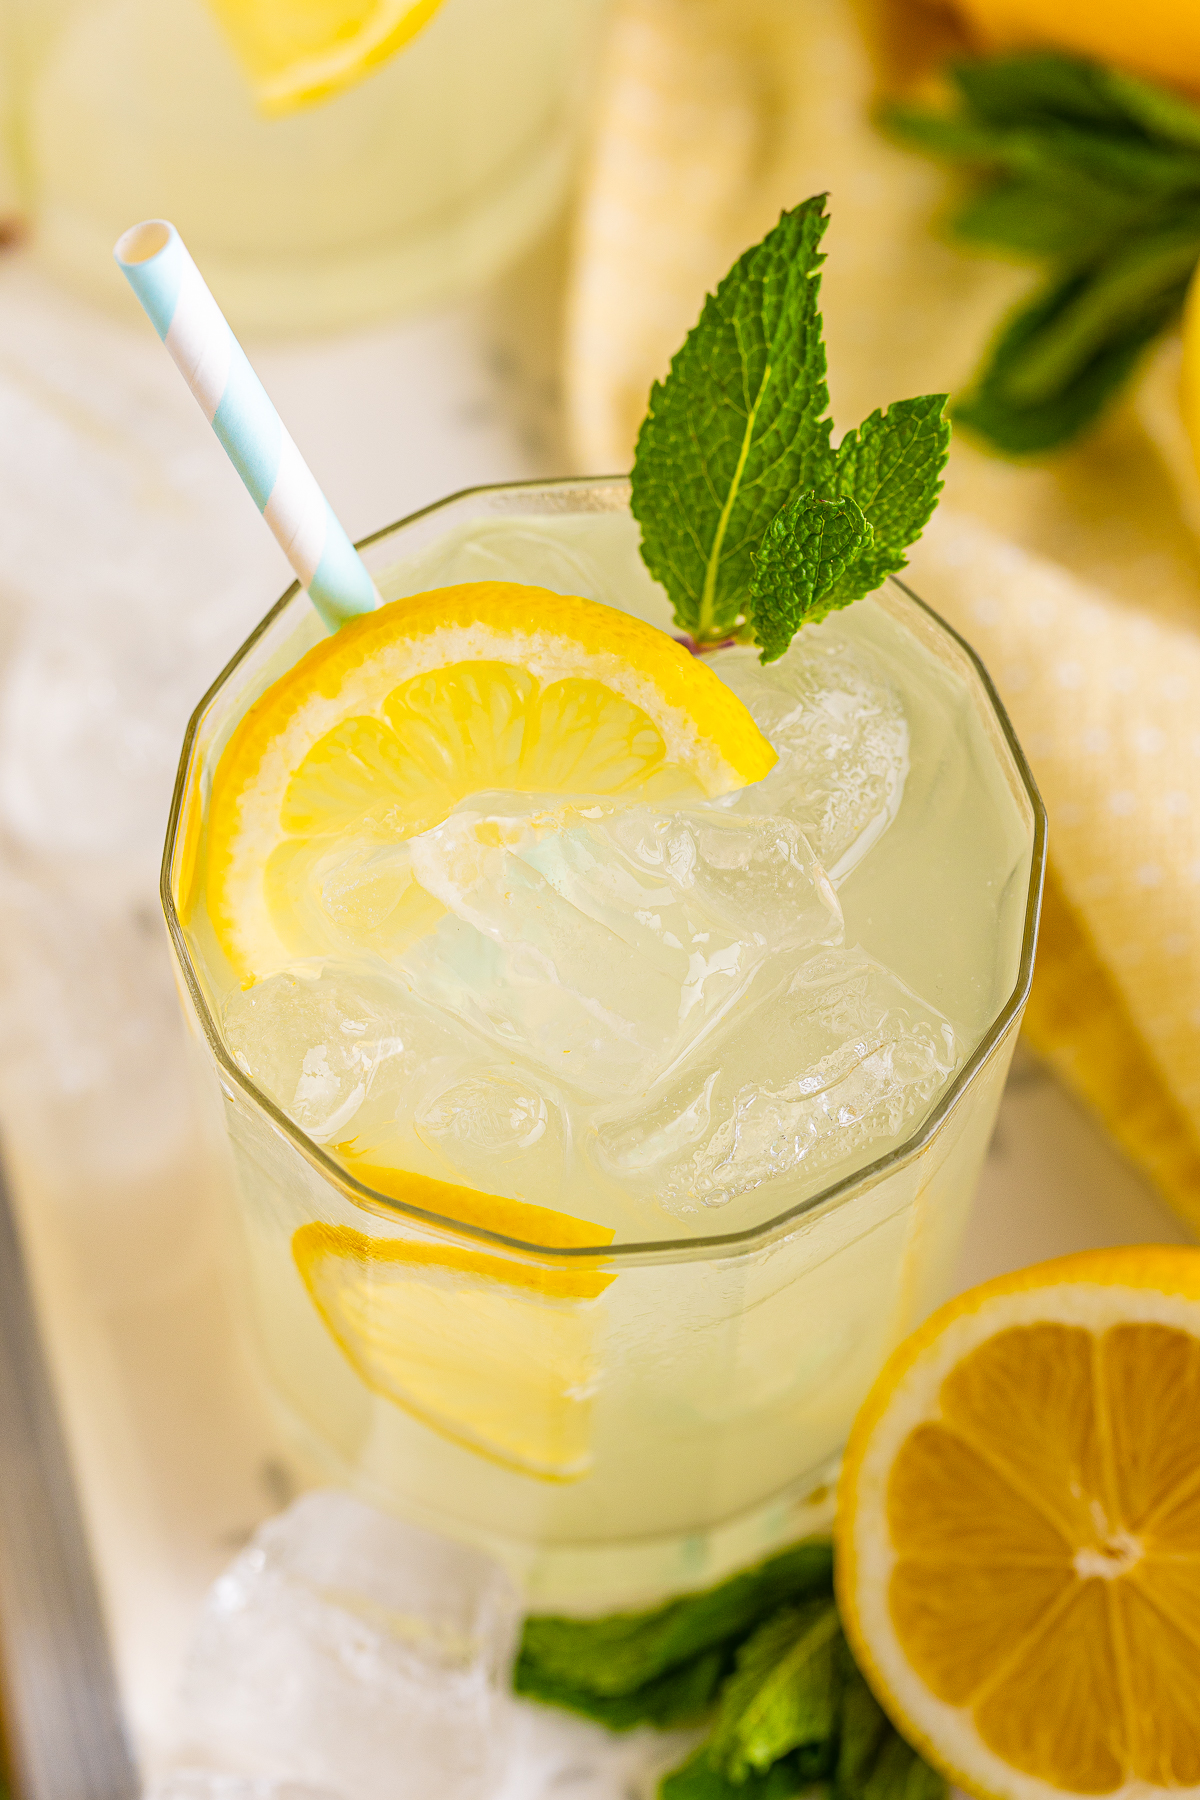 Overhead of glass of the Lemonade Recipe in glas with lemon and mint garnish.